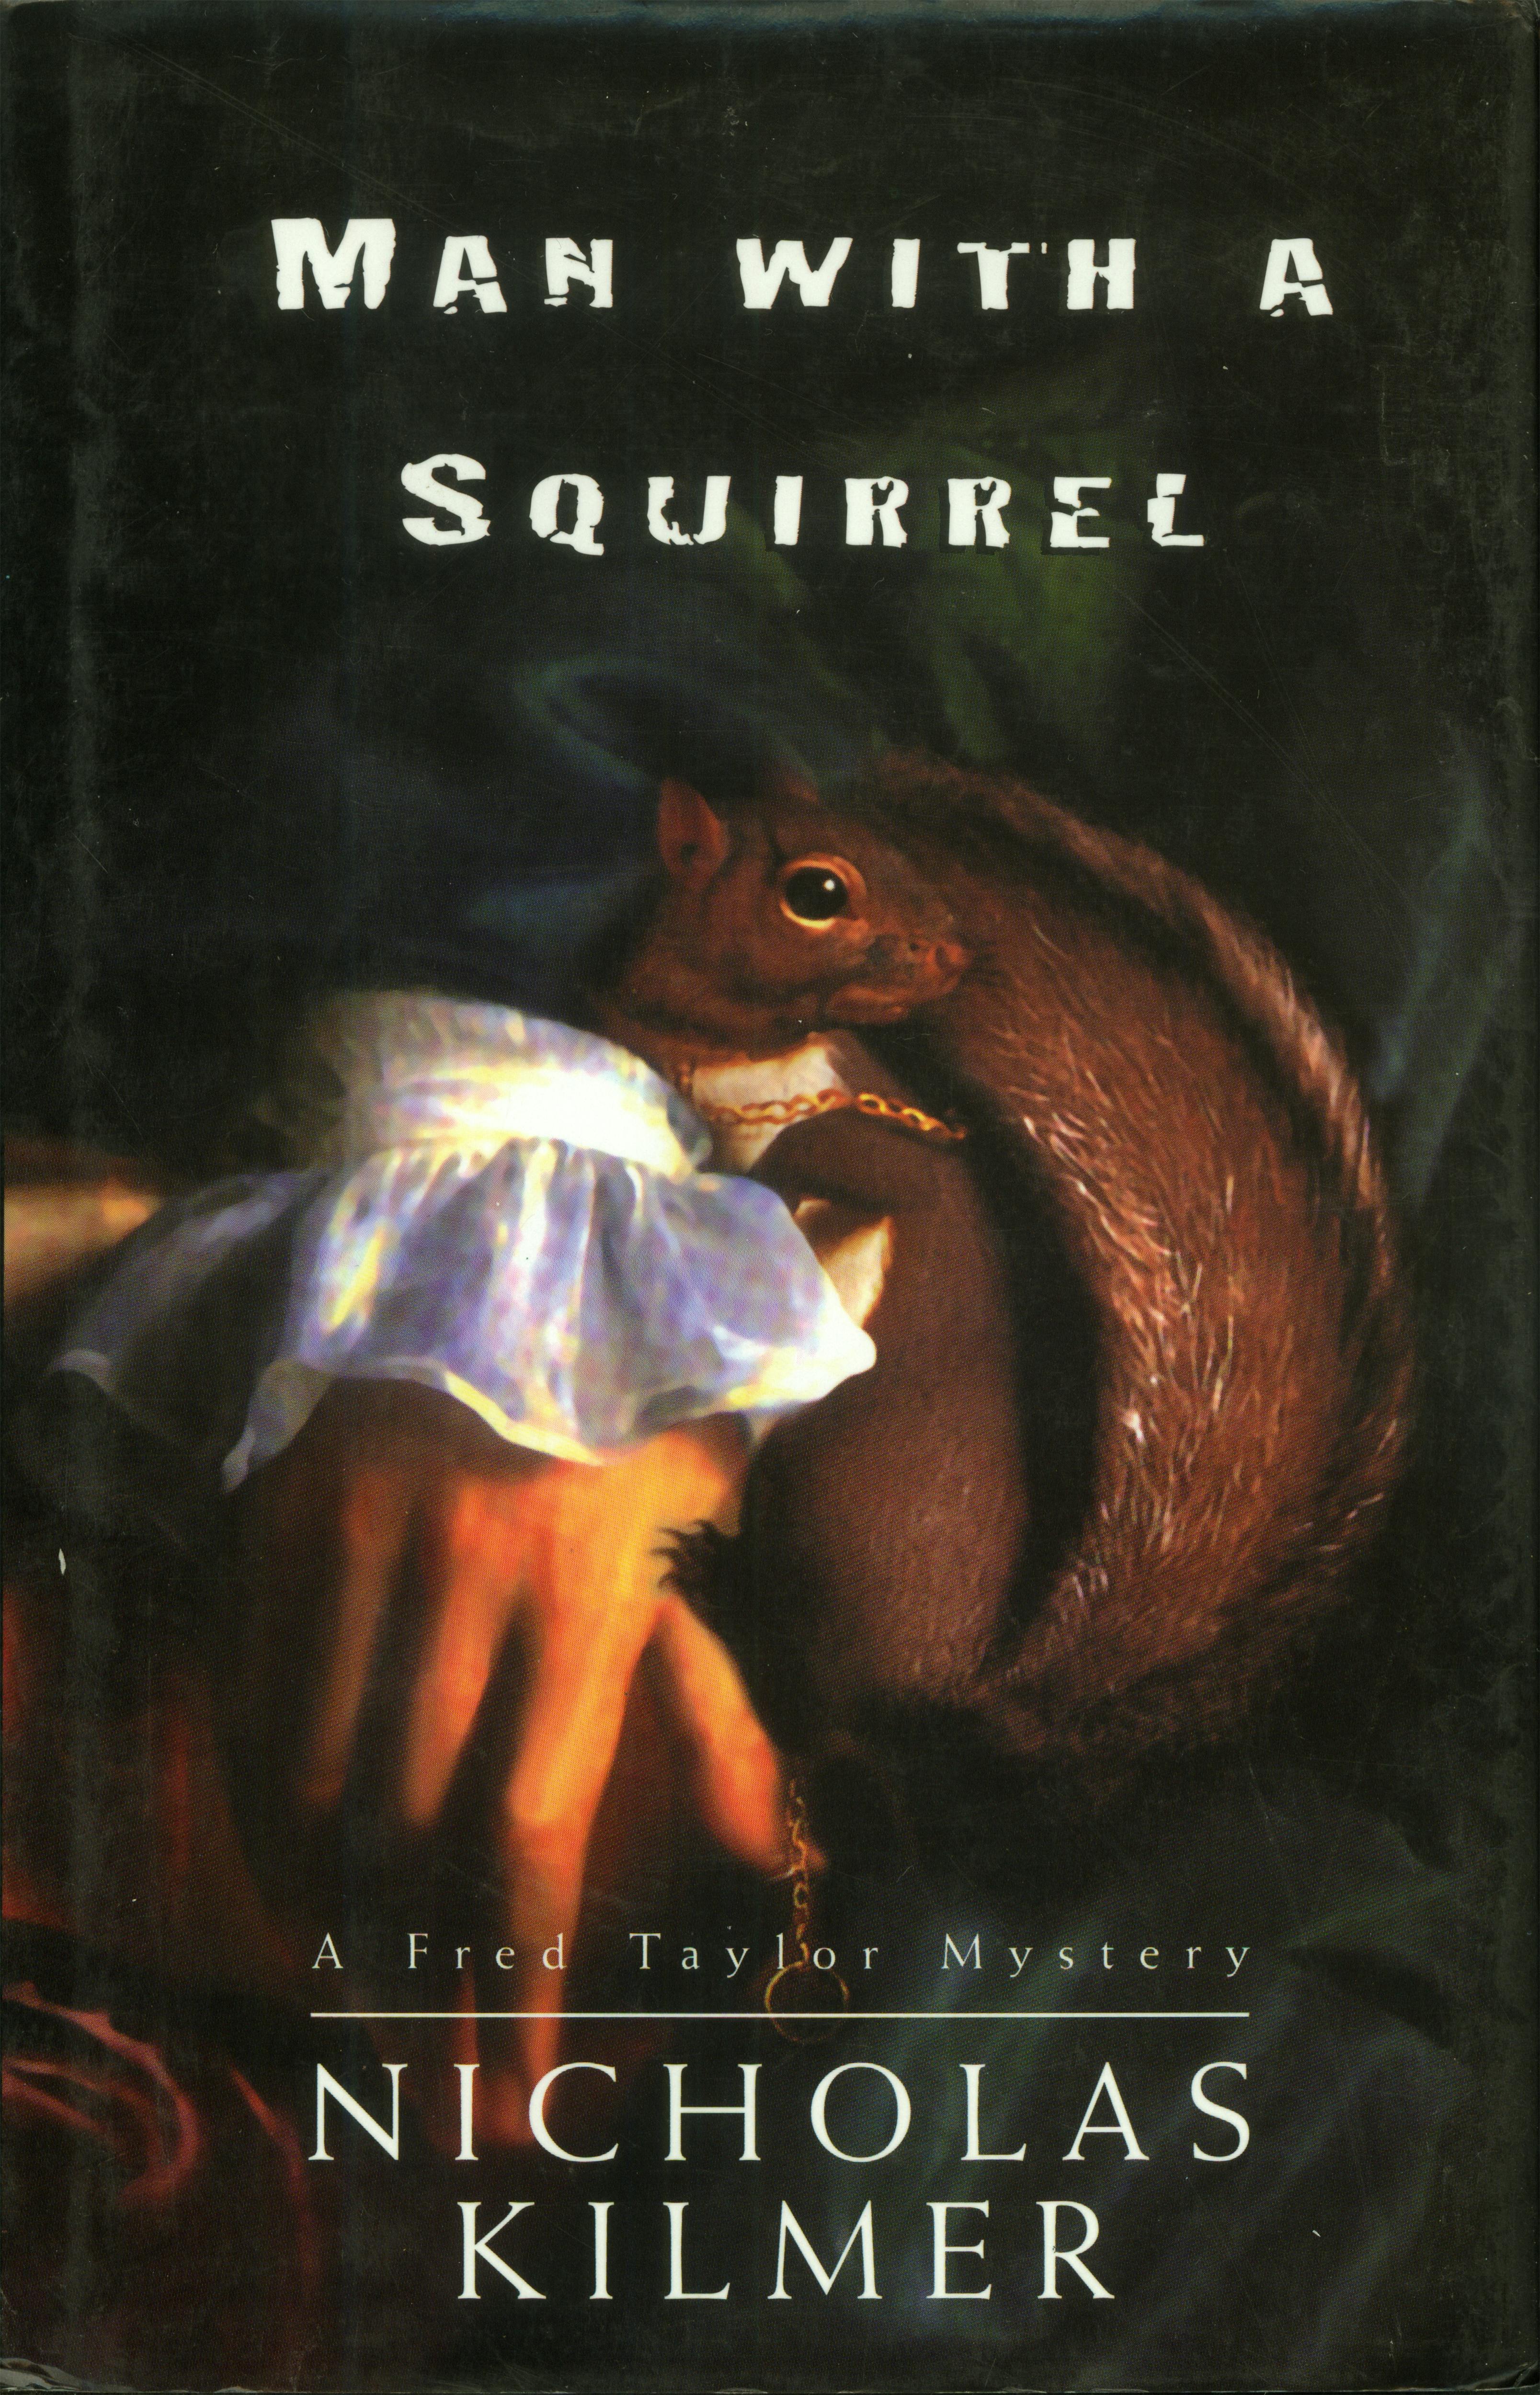 Man With a Squirrel